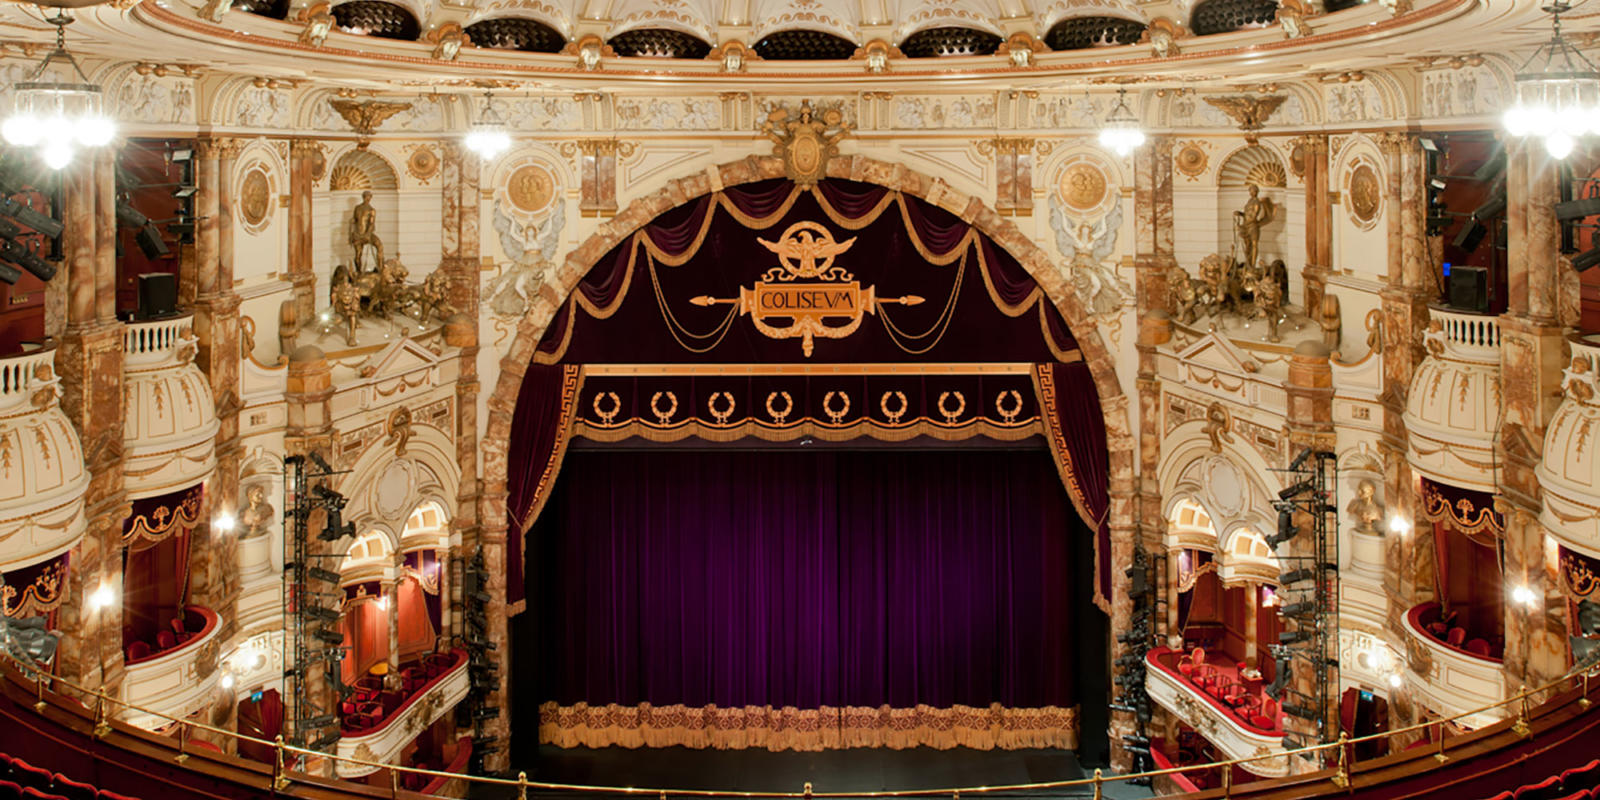 View of the London Coliseum stage